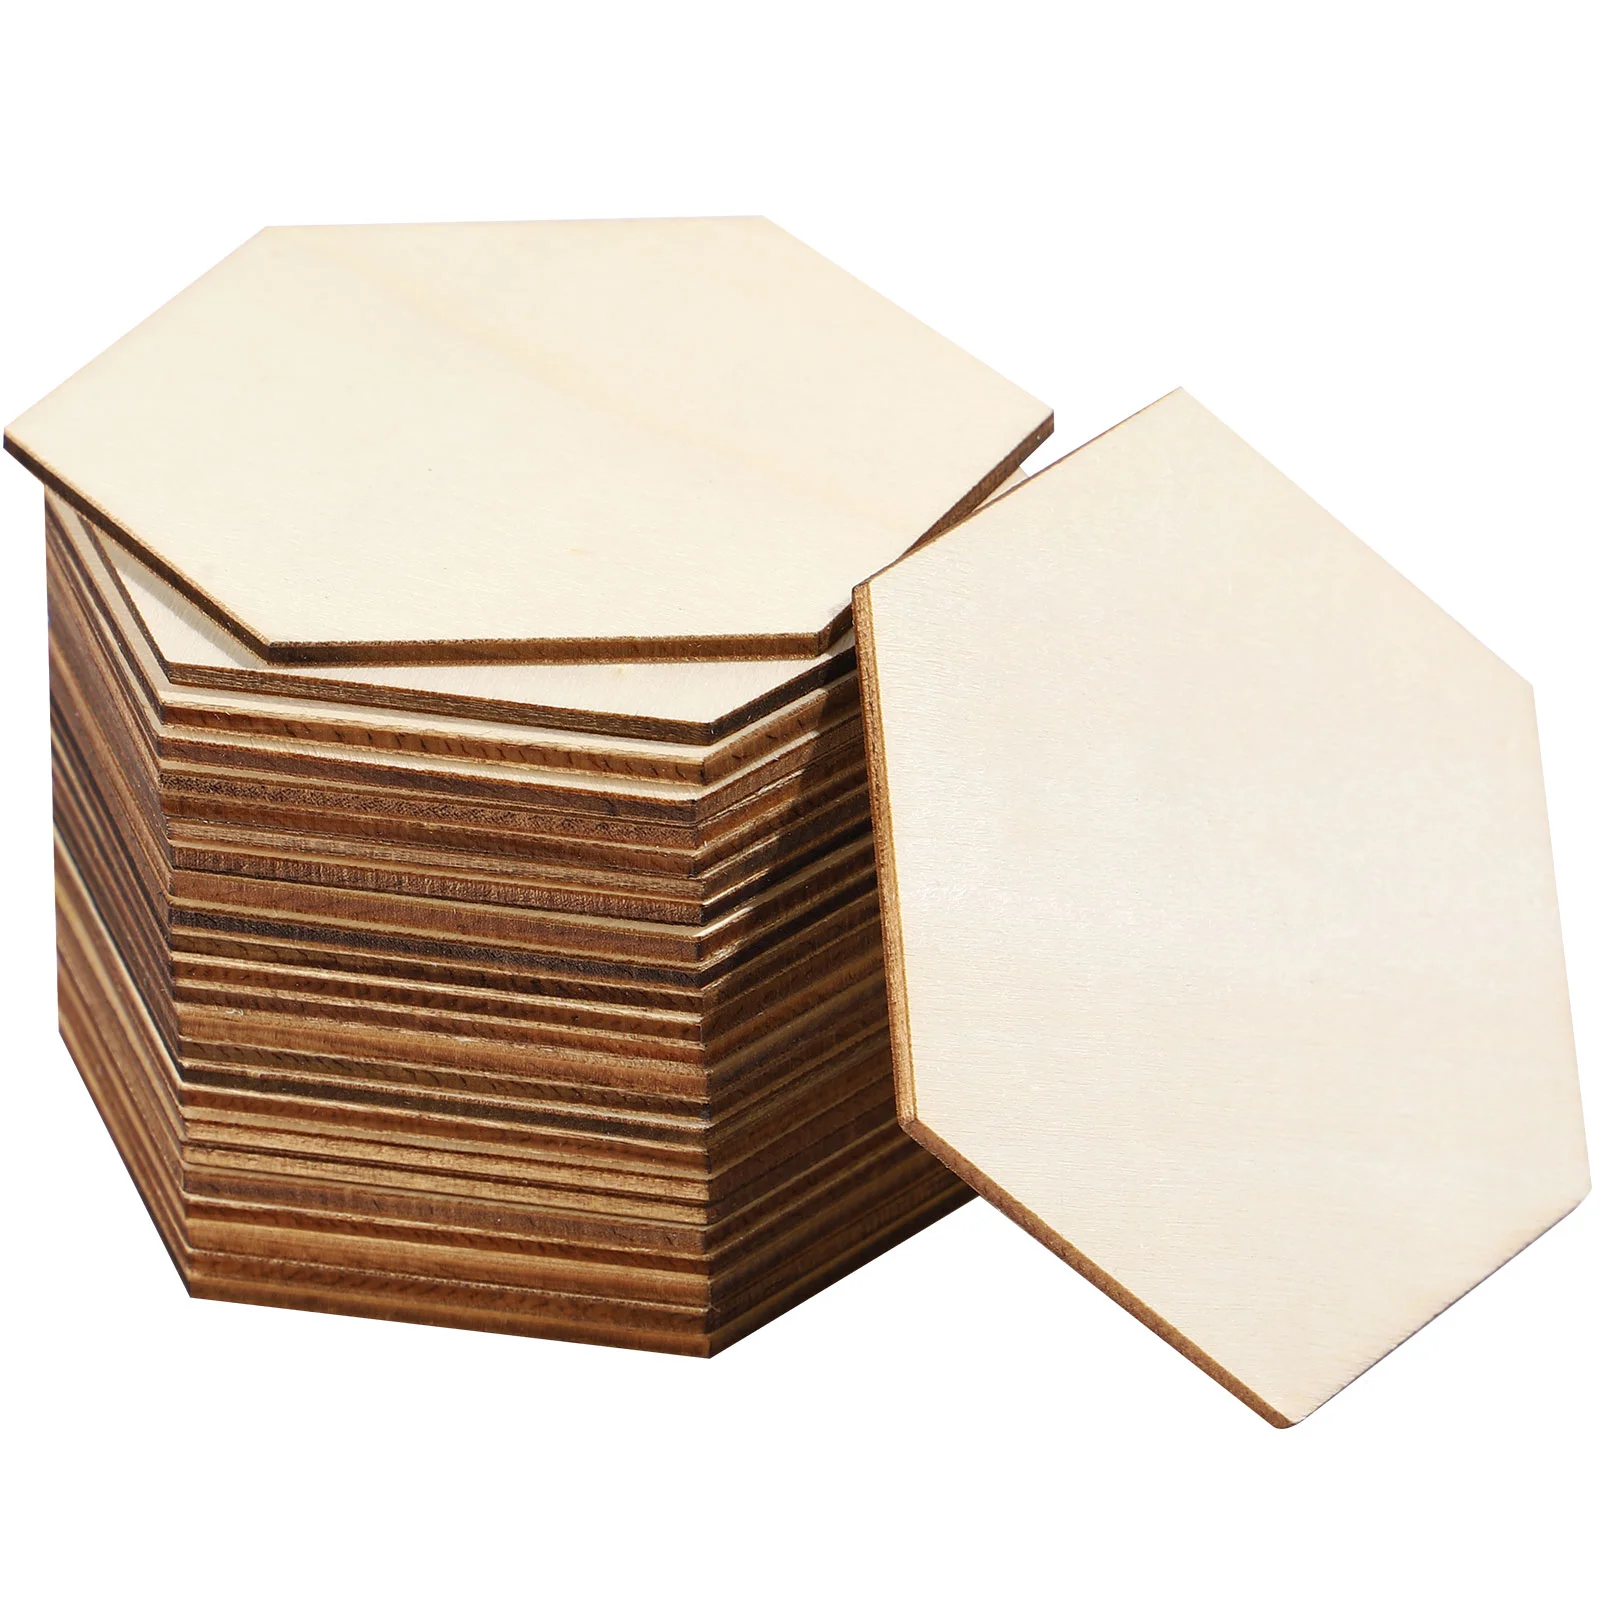 

Wood. Wooden. Unfinished Blank Crafts Hexagon Diy Ornaments Chips Chip Slices Pieces Coasters Natural Slice Cutouts Name Labels